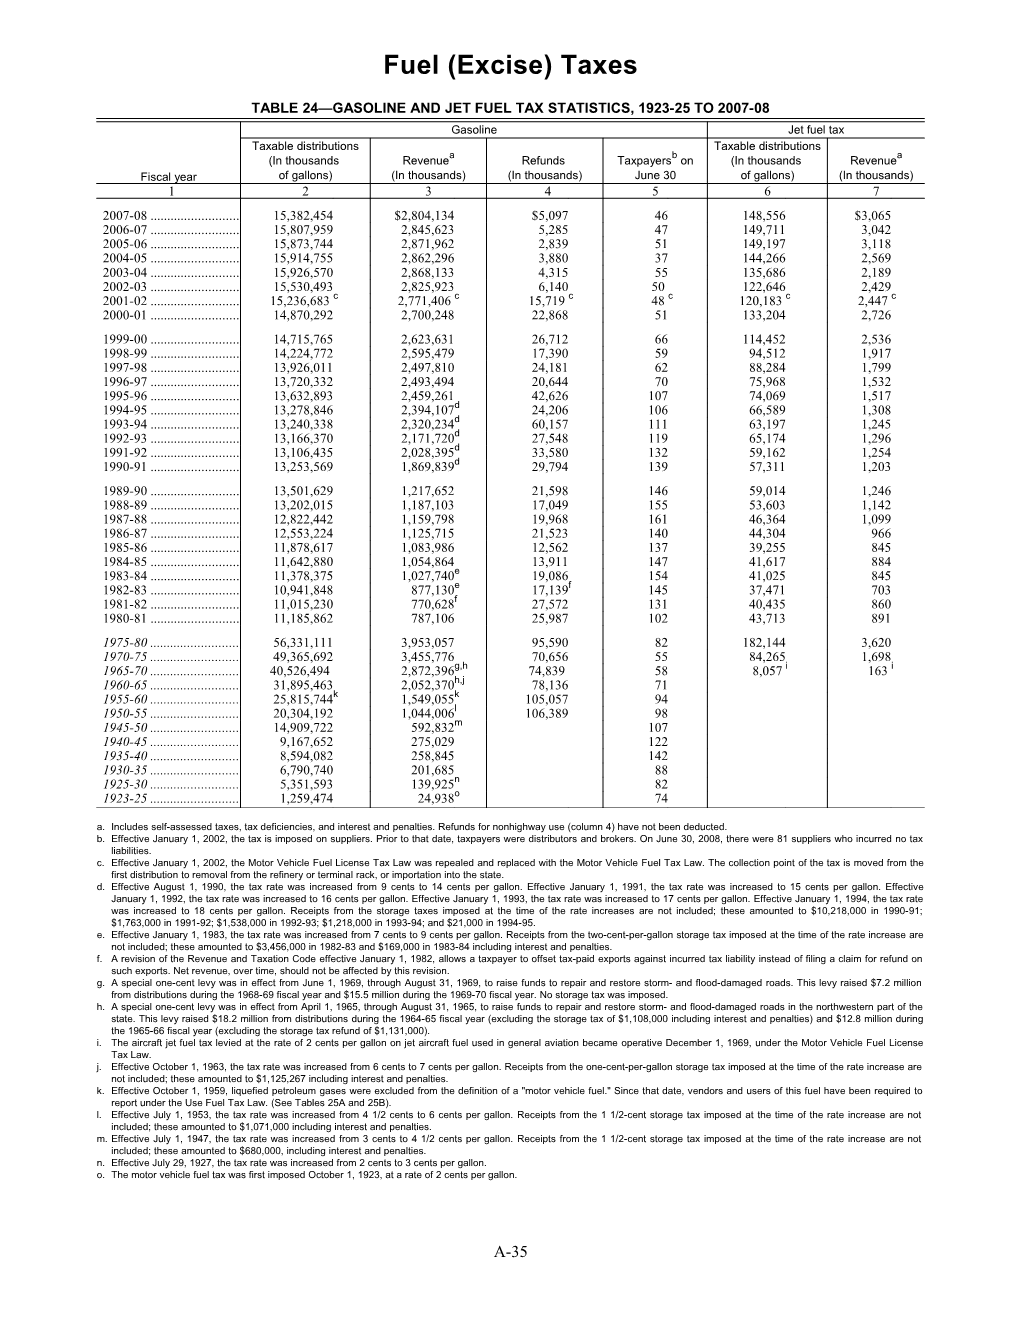 Table 24 Gasoline and Jet Fuel Tax Statistics, 1923-25 to 2007-08